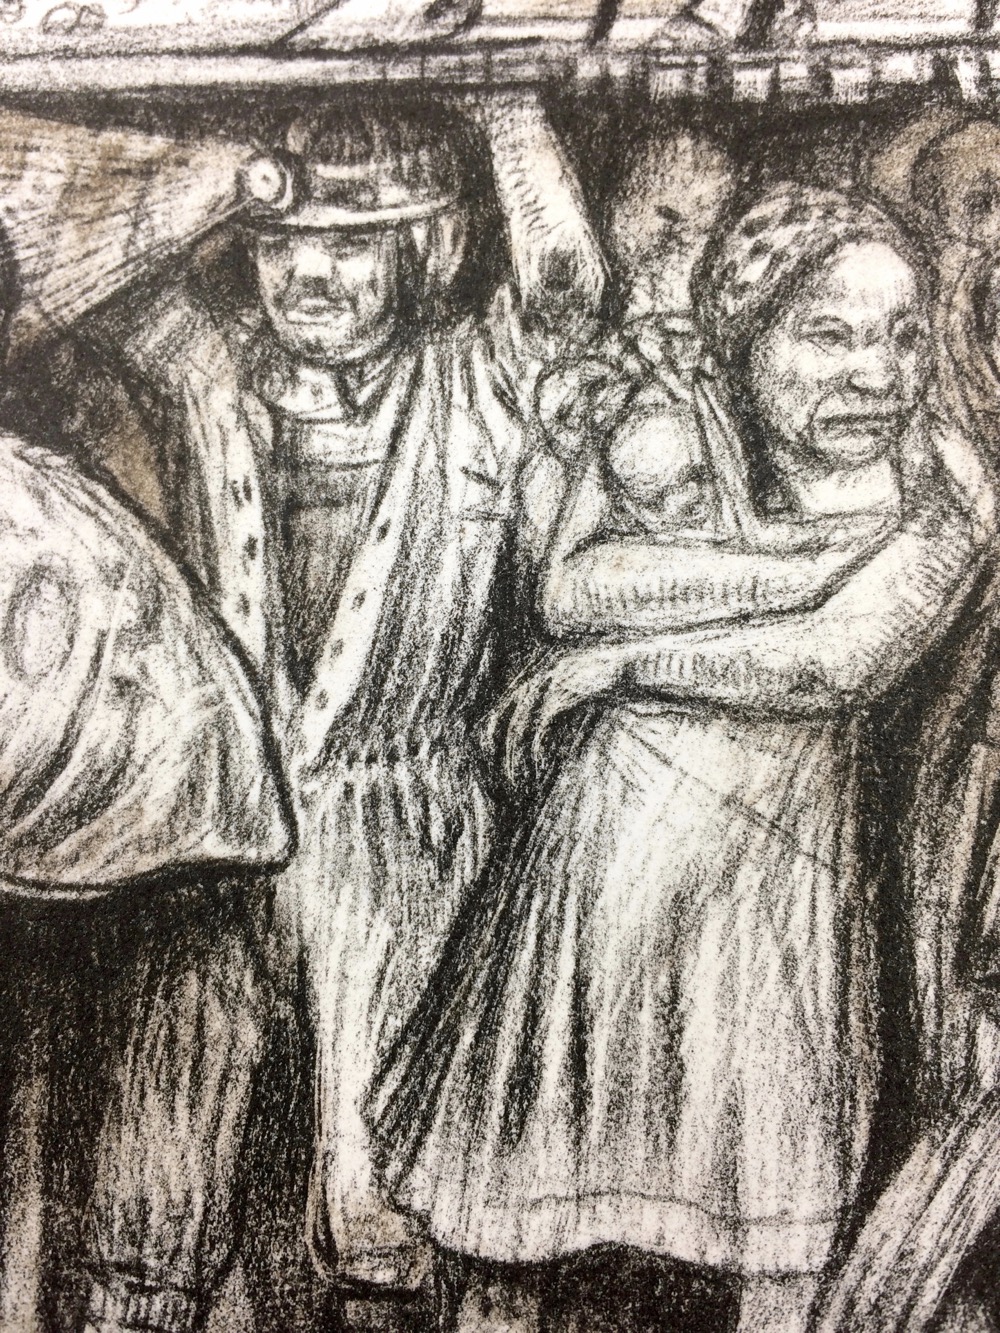 Detail of print showing a miner and a woman holding babies